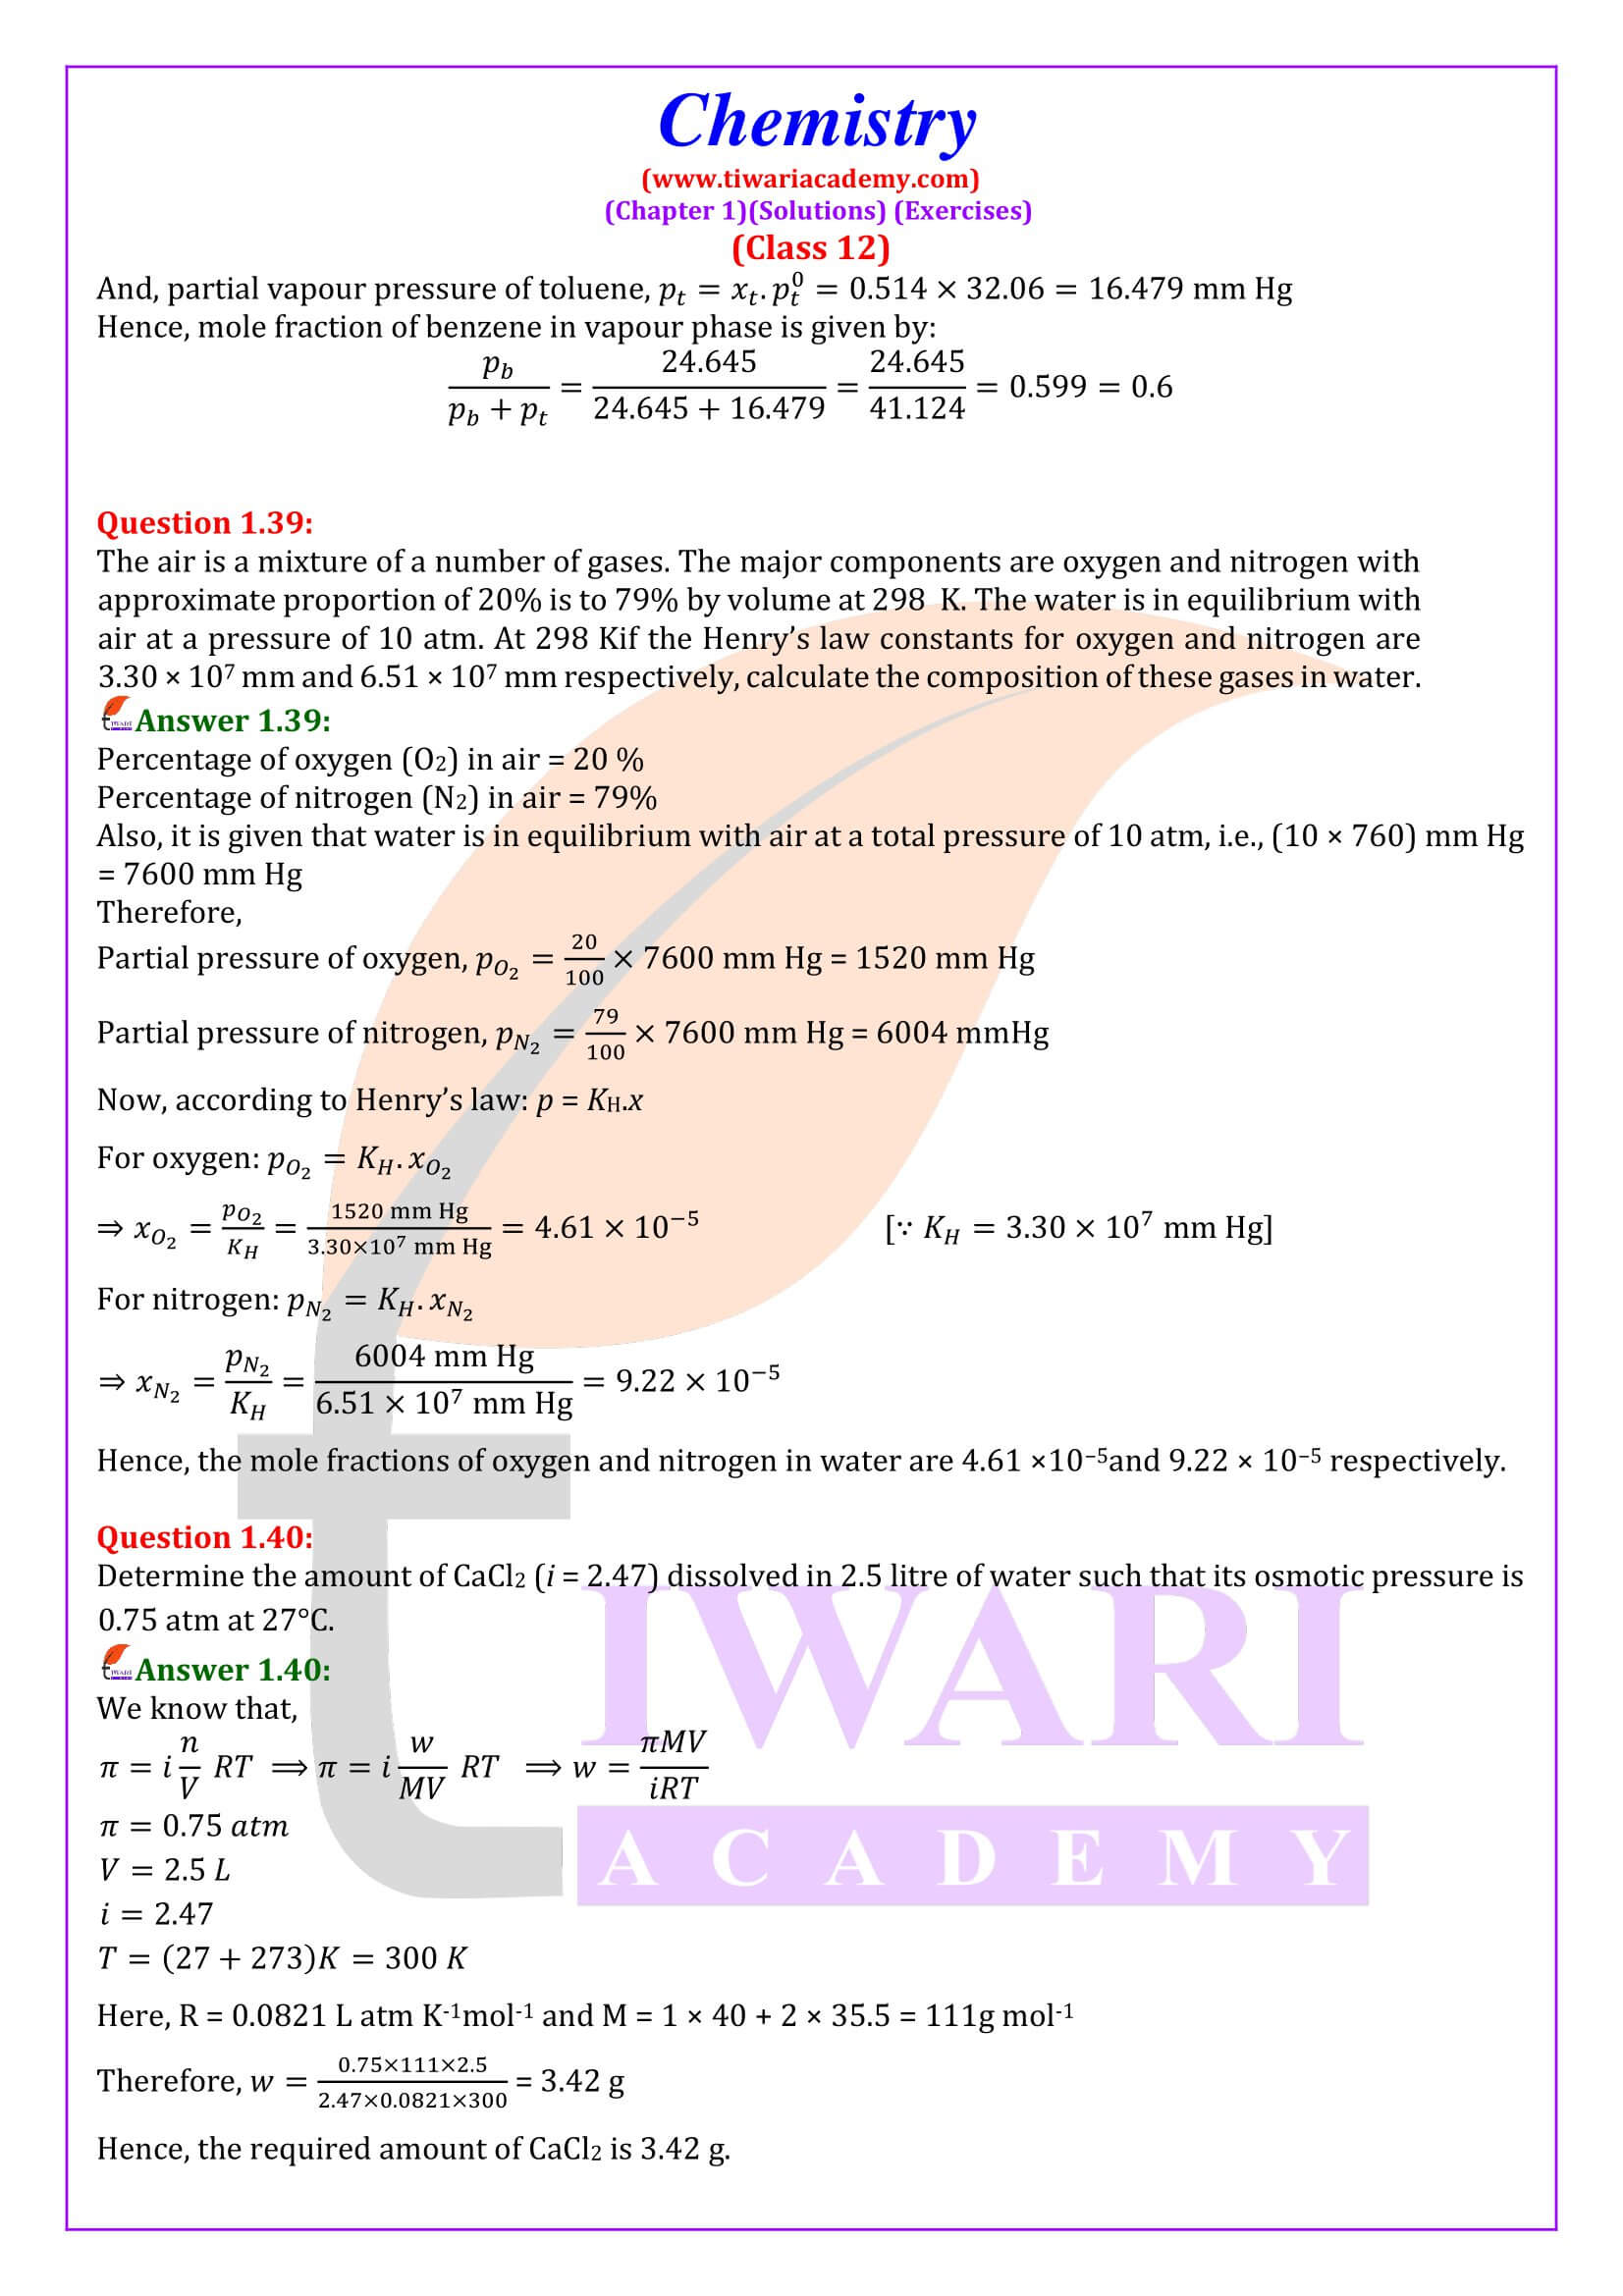 NCERT Class 12 Chemistry Chapter 1 Exercise Answers guide